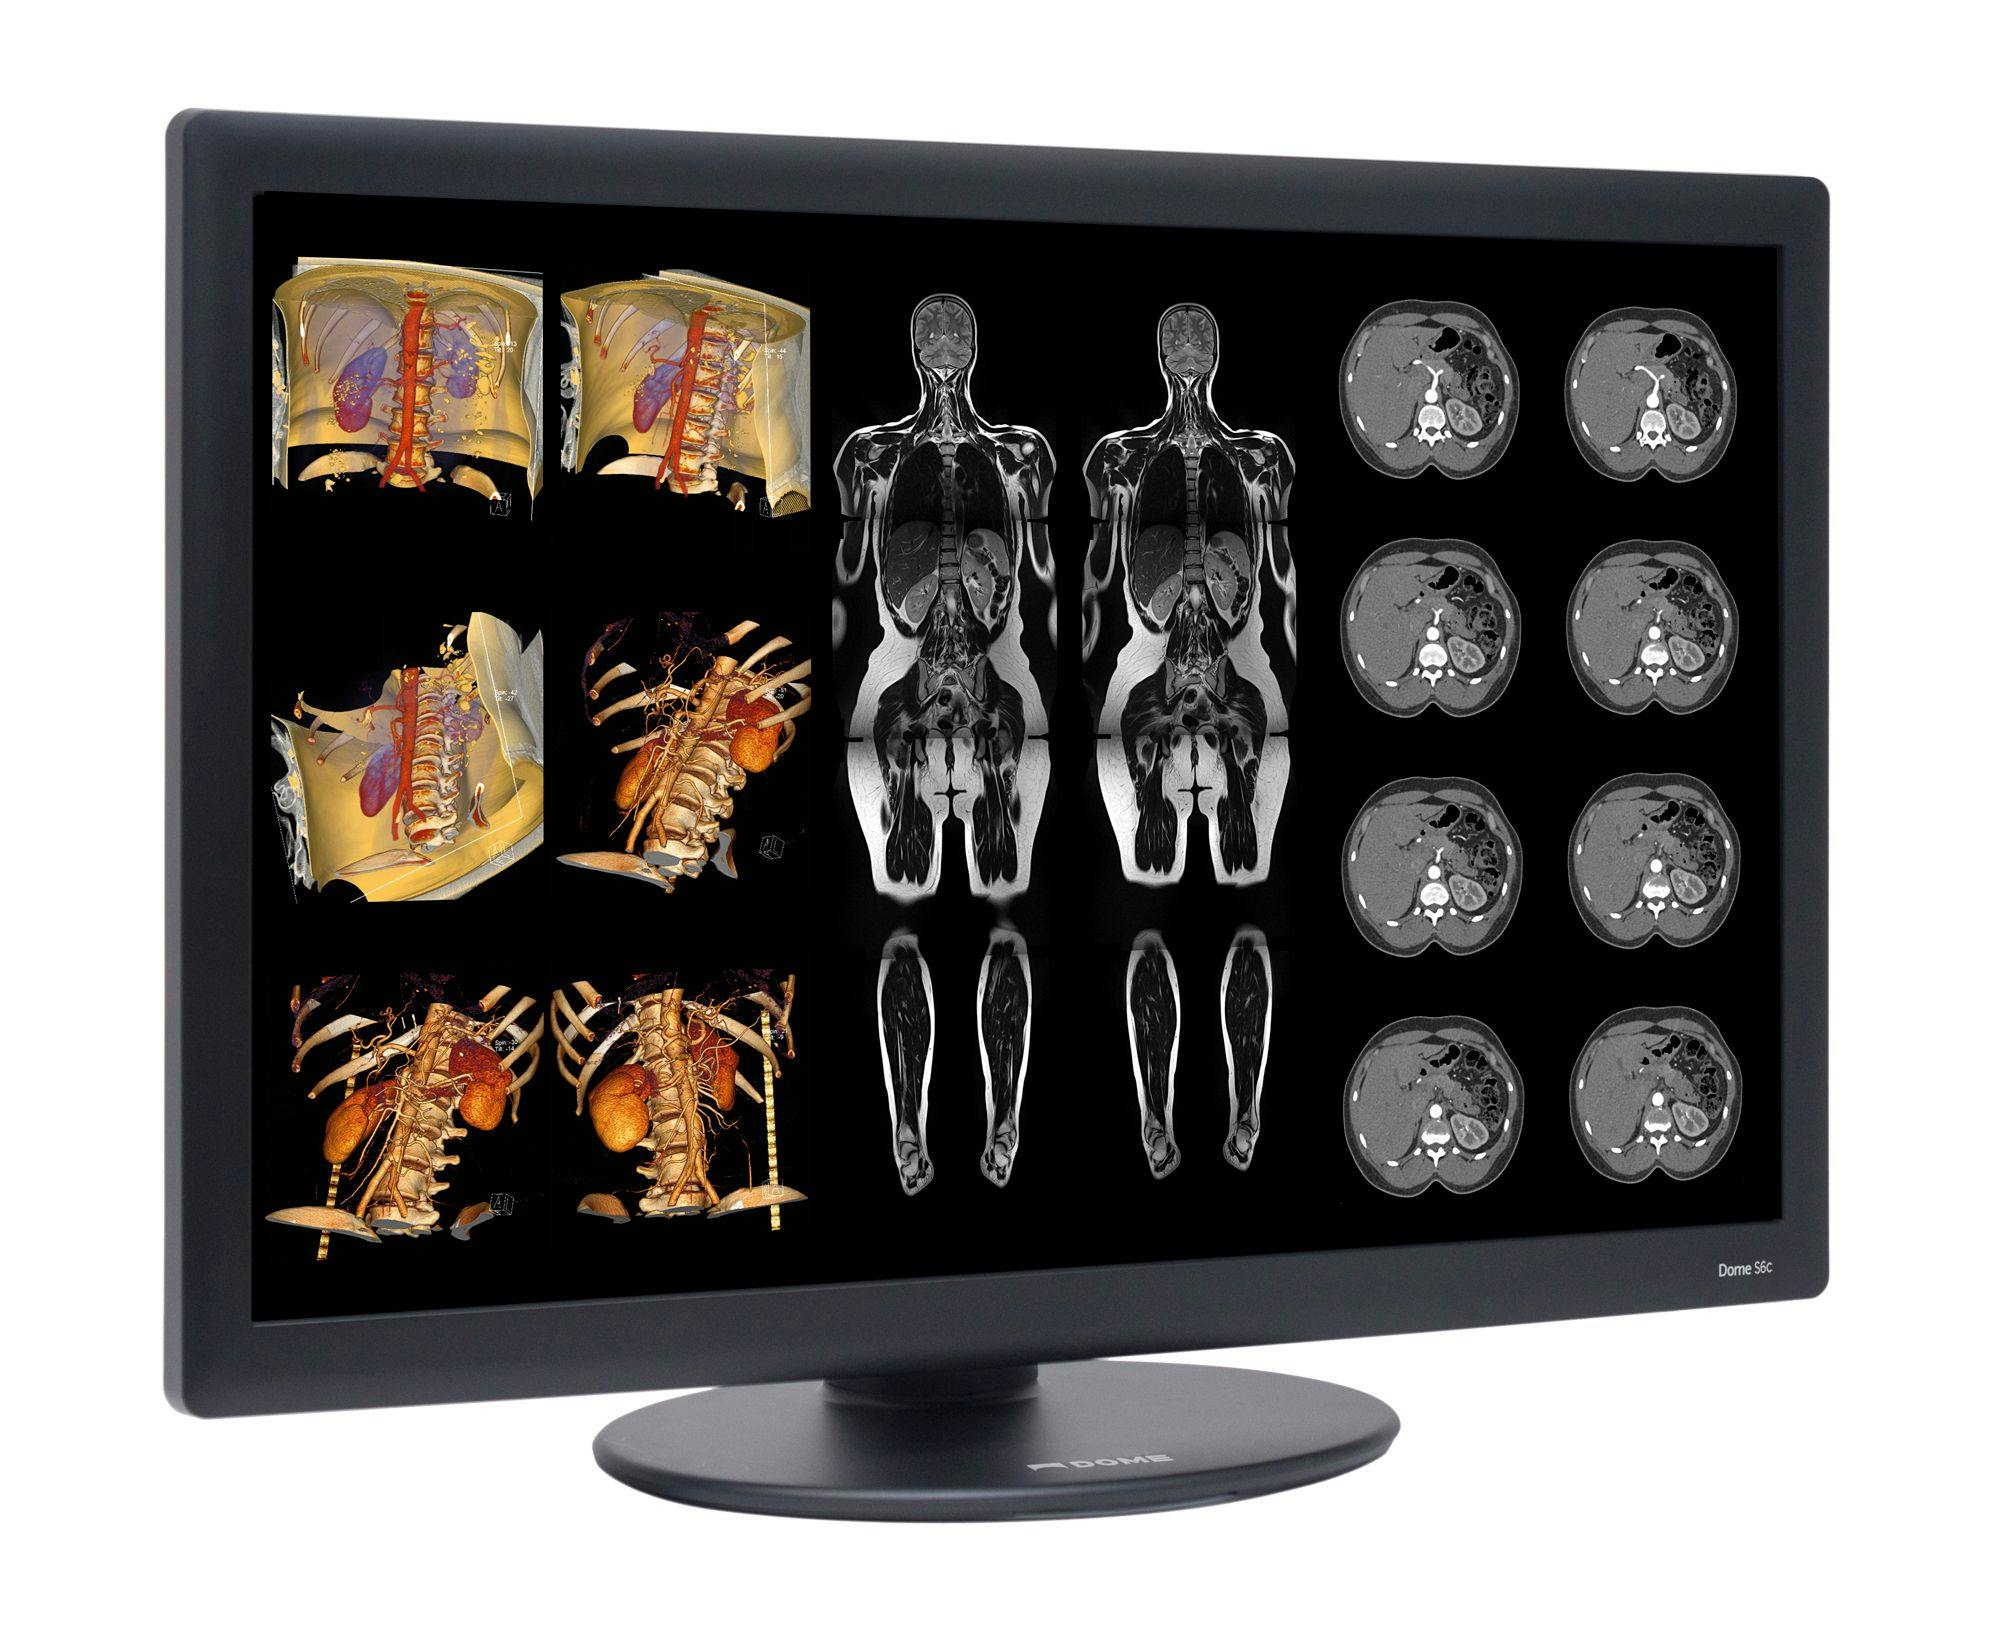 FDA Clearance Given for 6 MP LED Widescreen Radiology Display